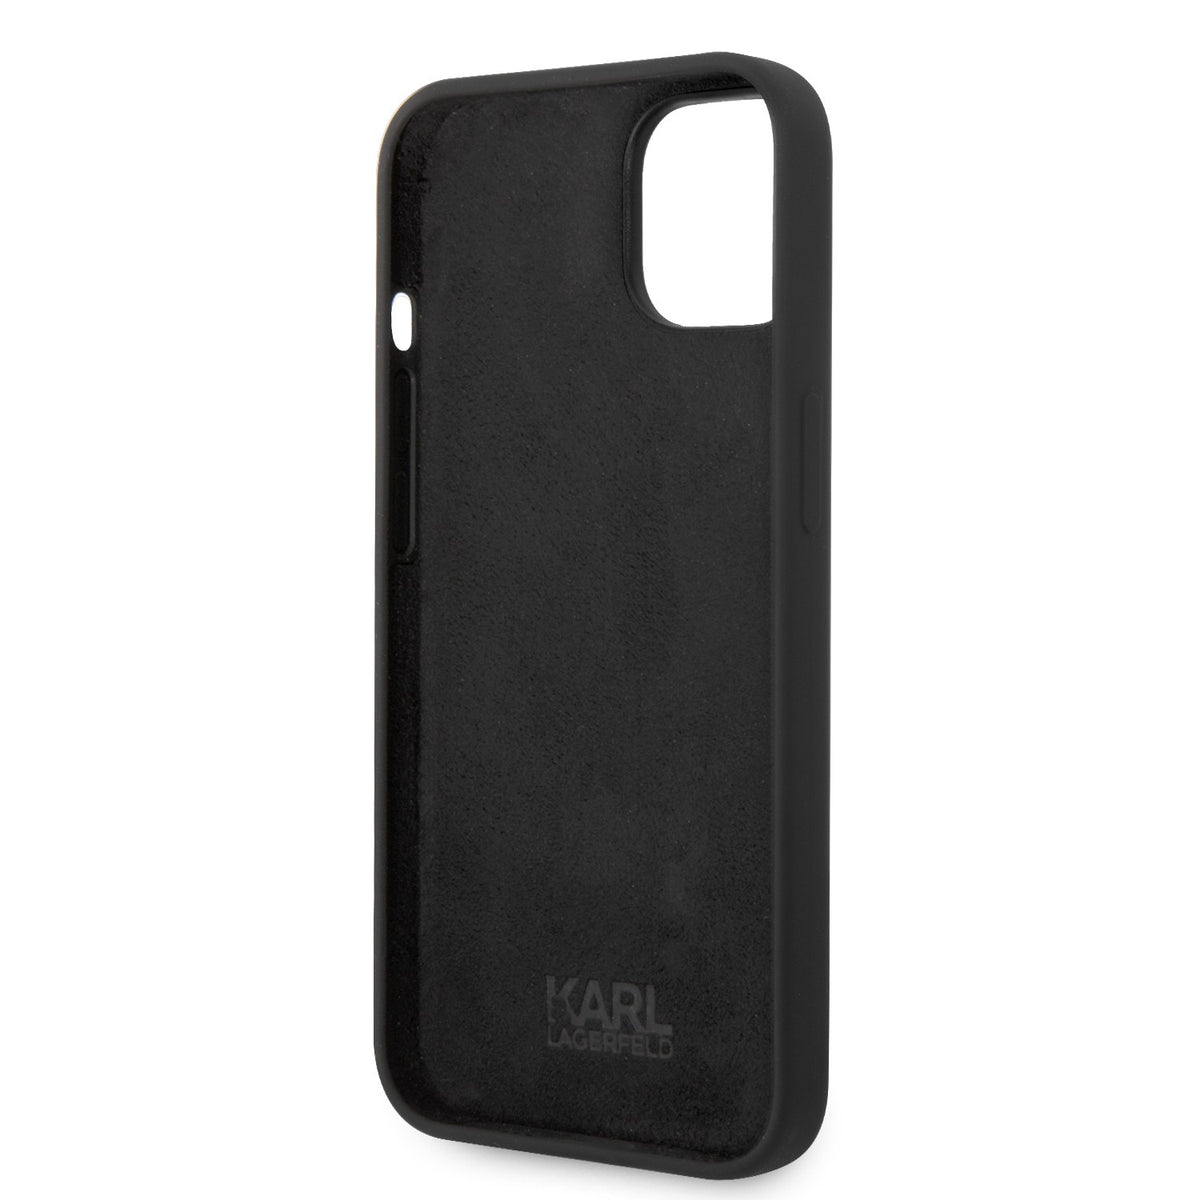 Apple iPhone 14 and 14 Plus silicon cases in Black & Silver colors